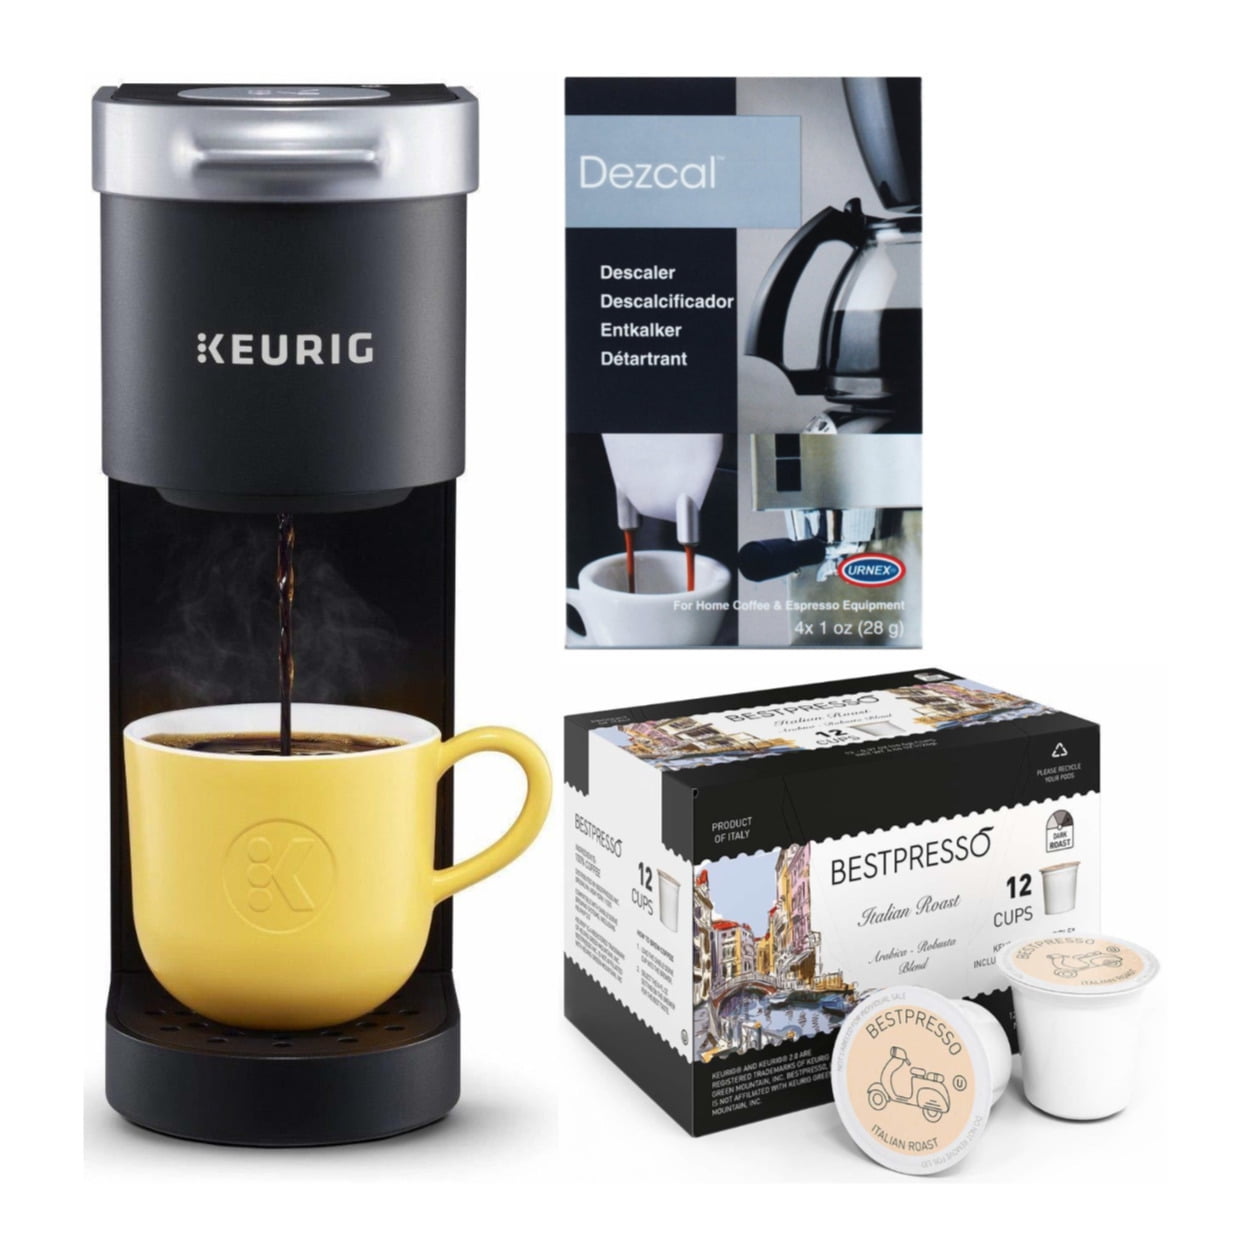 Keurig's compact K-Mini Coffee Maker in black now $60 at  (Reg. up to  $100)